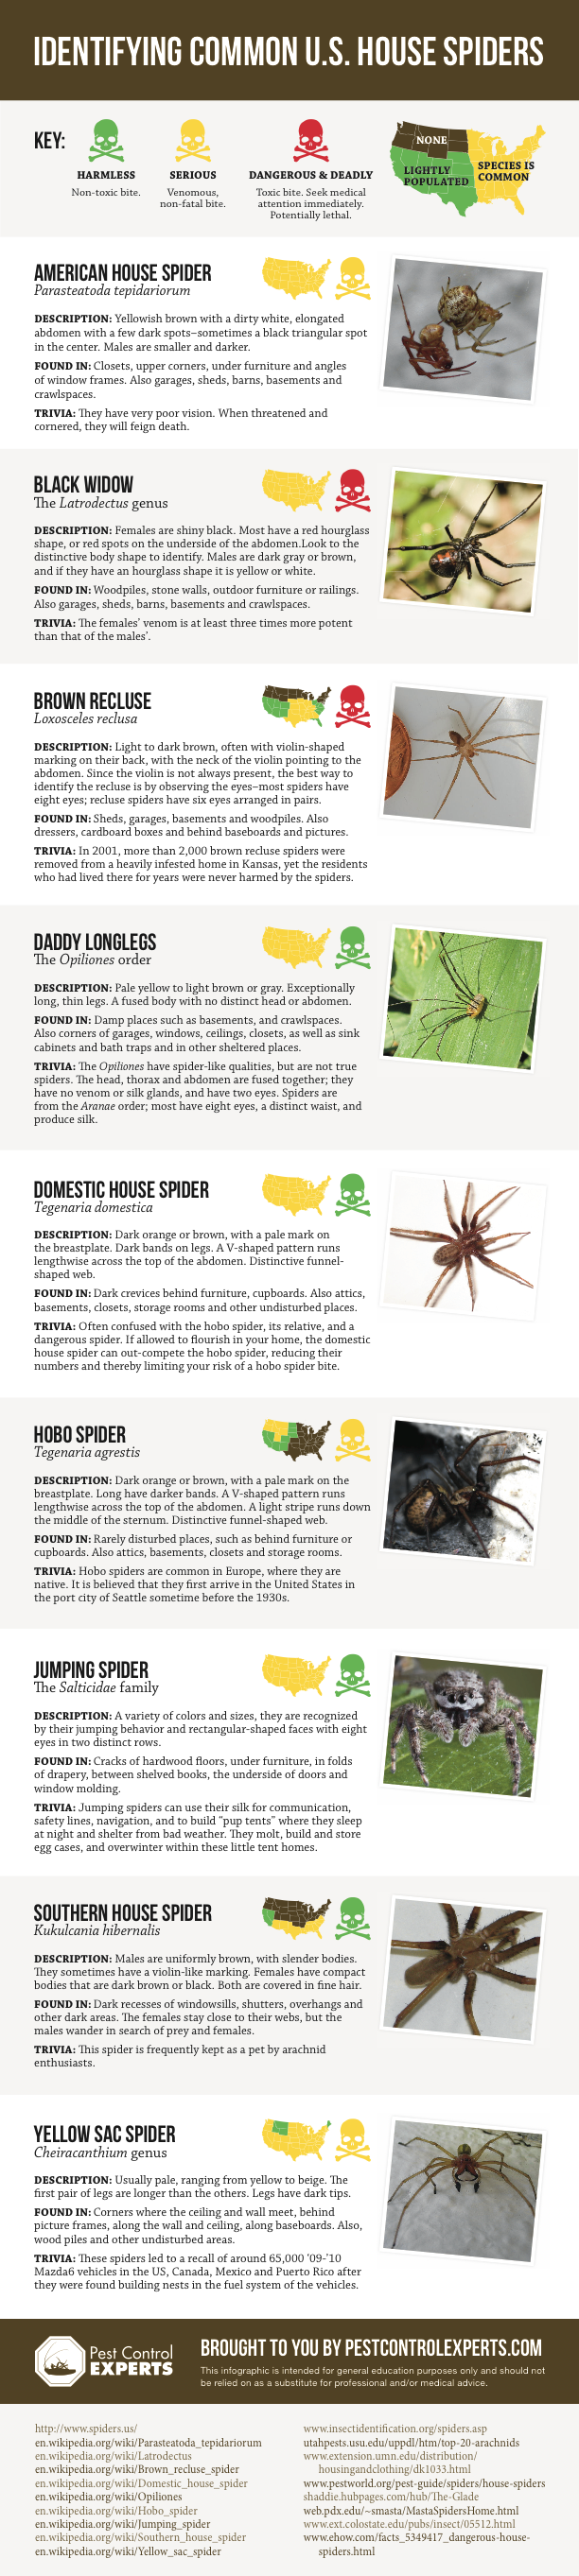 Harmless Or Deadly How To Identify Common House Spiders Visually